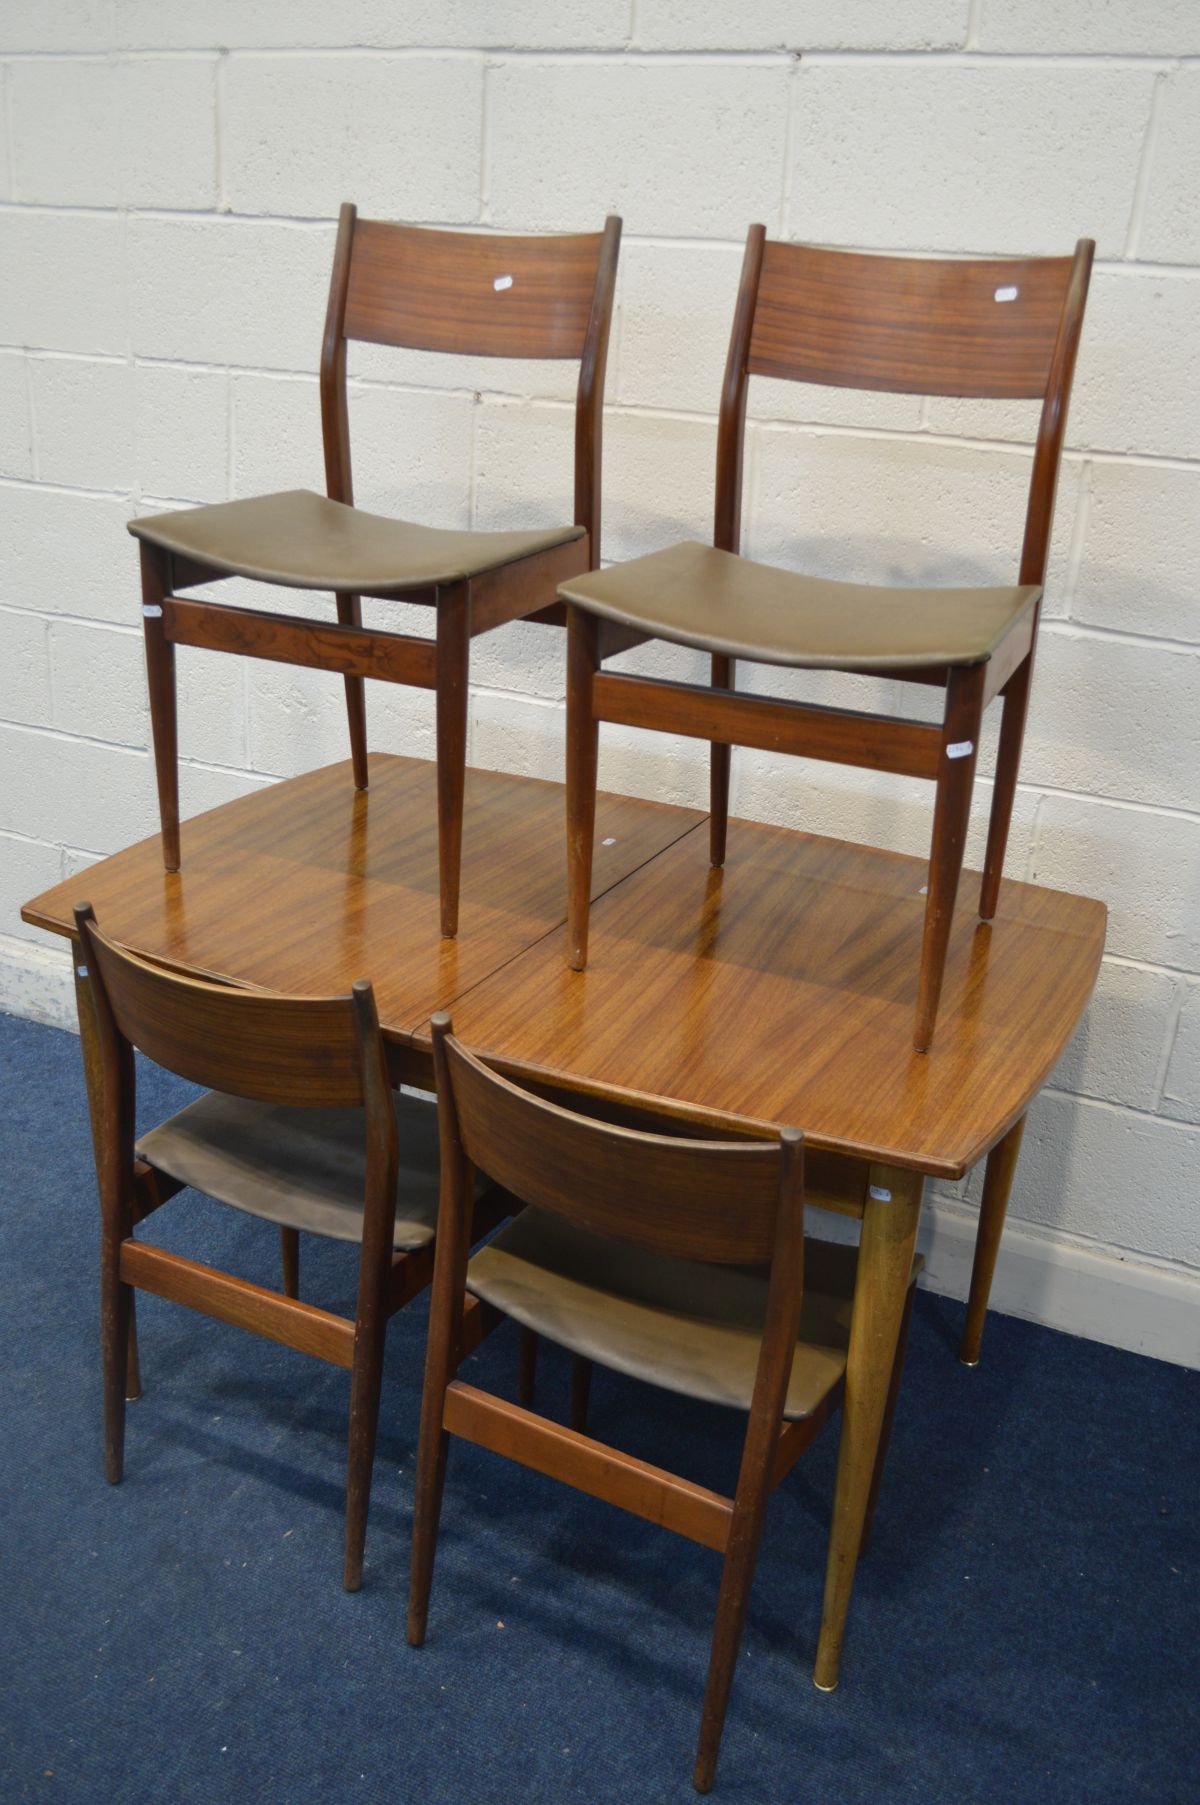 A 1950'S/60'S AFROMOSIA EXTENDING TABLE, with a single additional fold out leaf, extended length